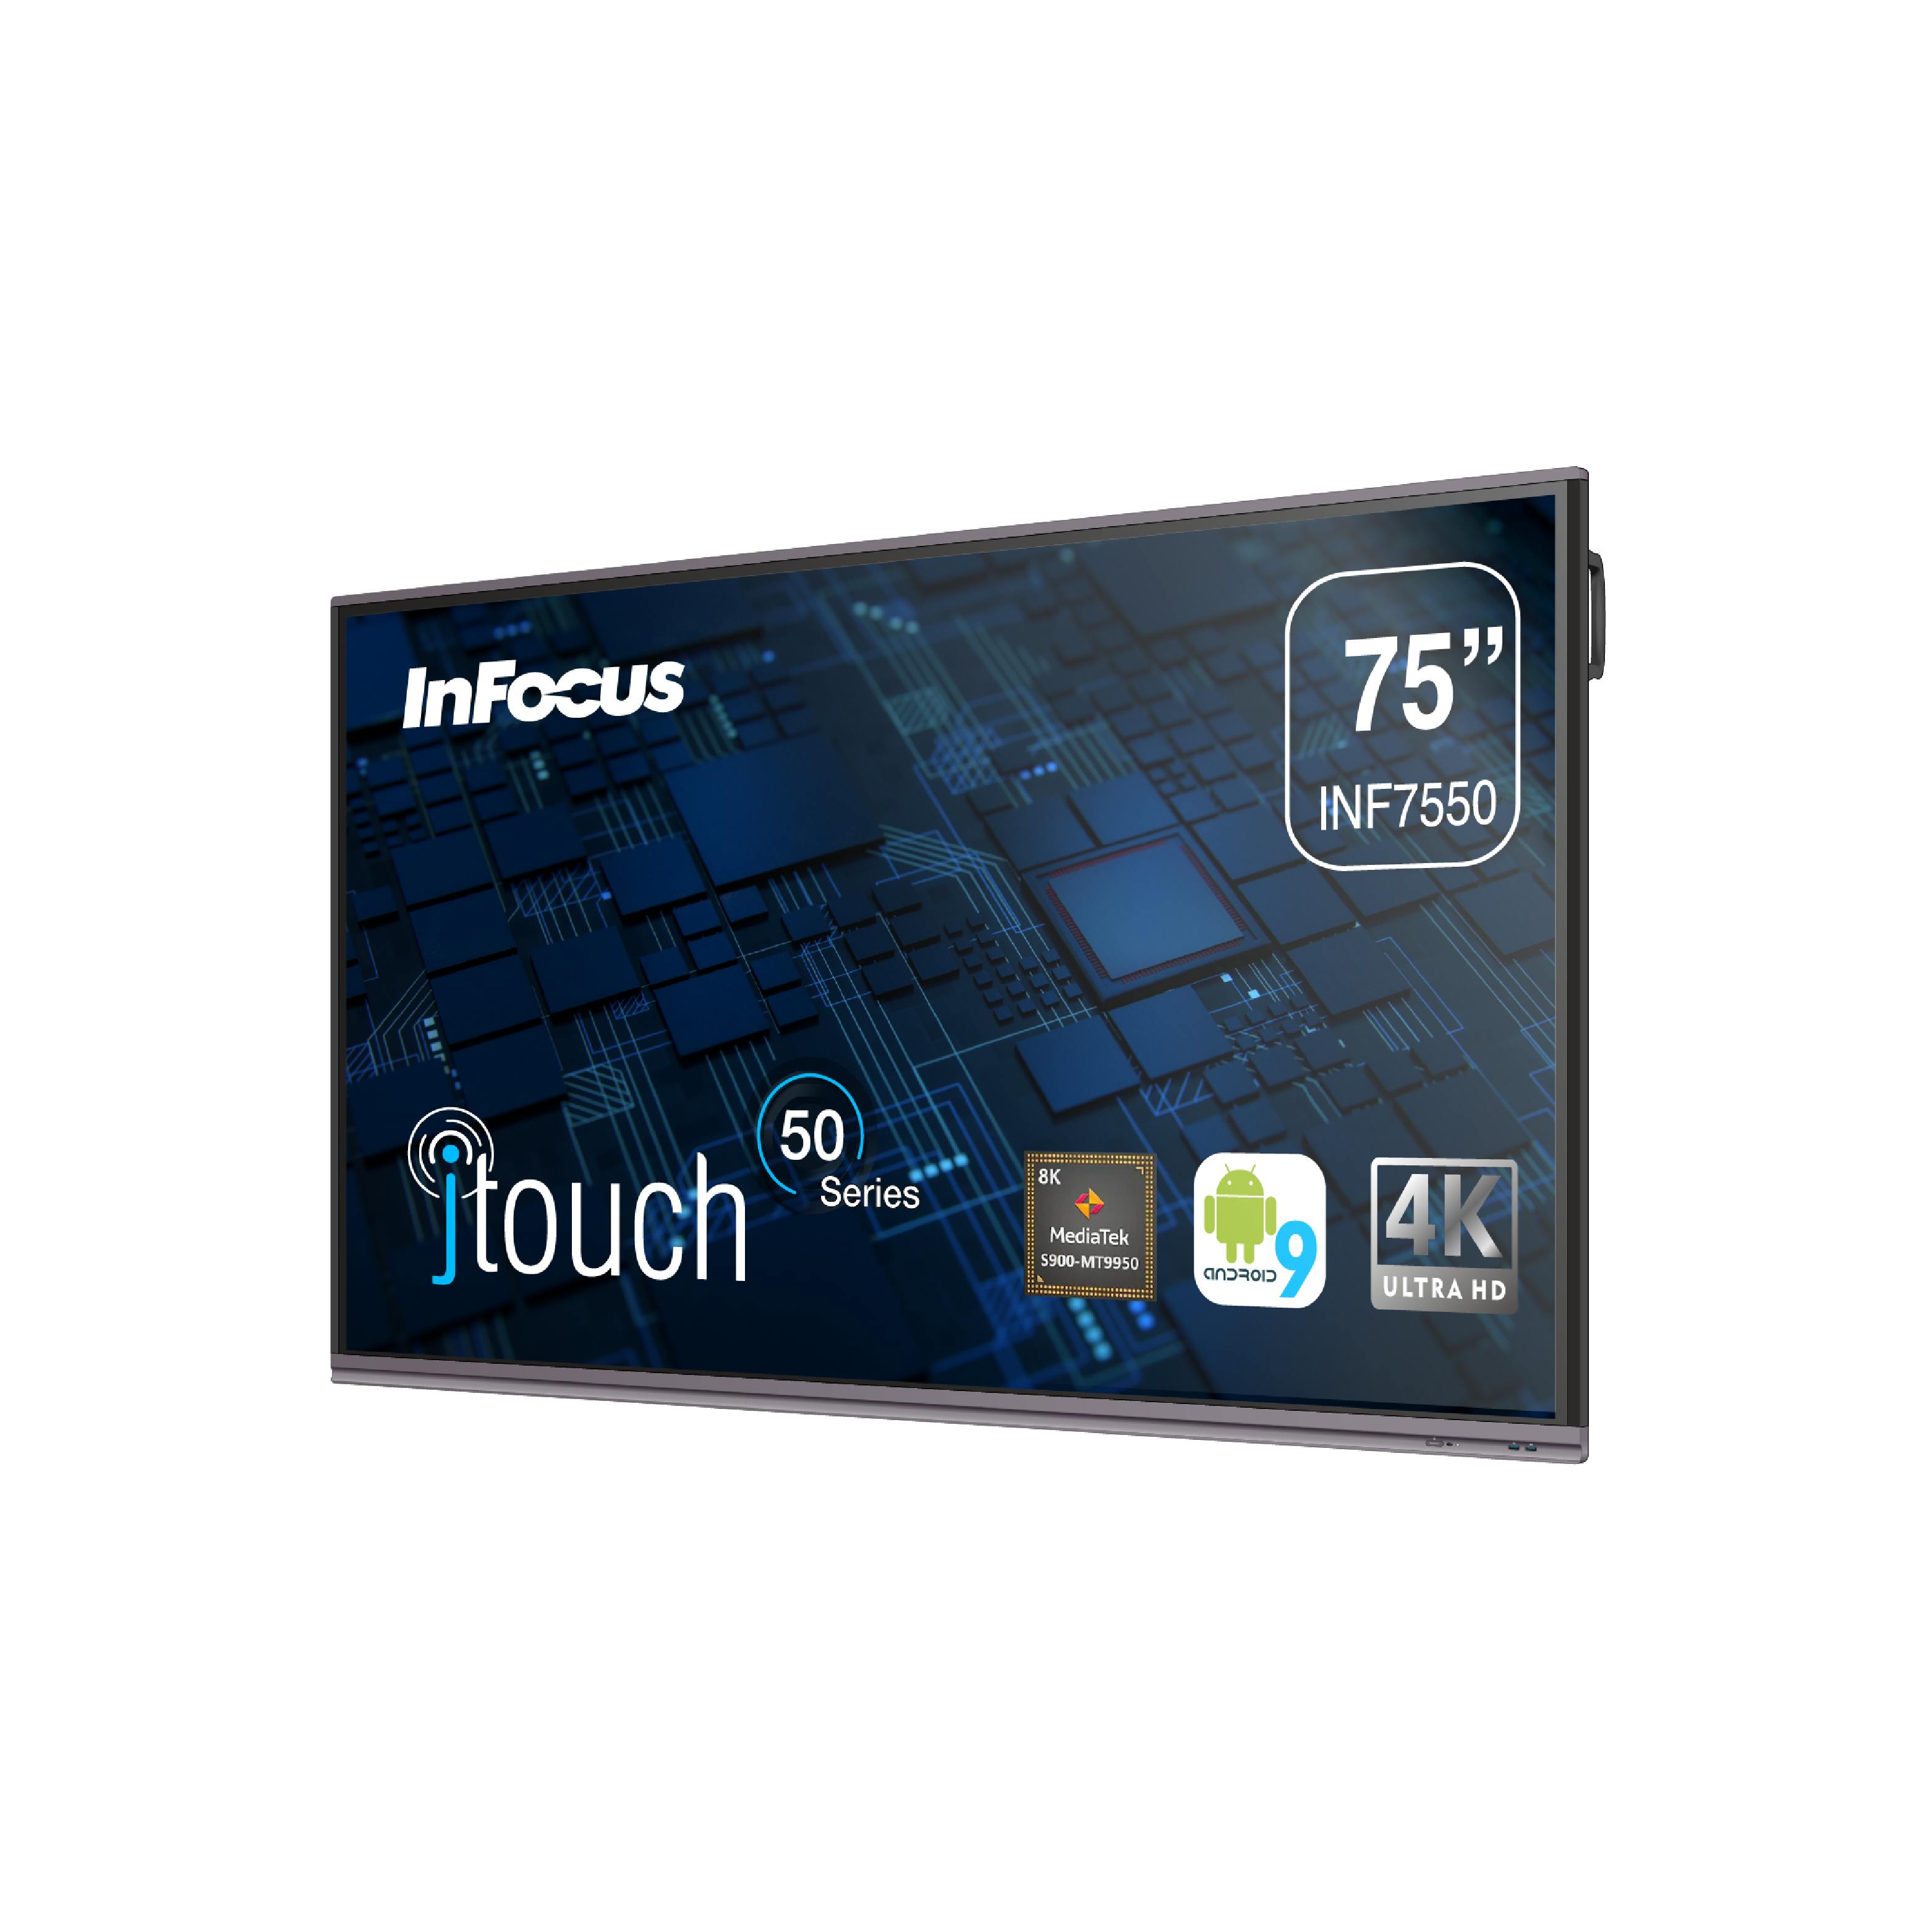 https://infocus.imgix.net/2022/04/JTouch-50-Series_INF7550_FR_90-01.png?auto=compress%2Cformat&ixlib=php-3.3.1